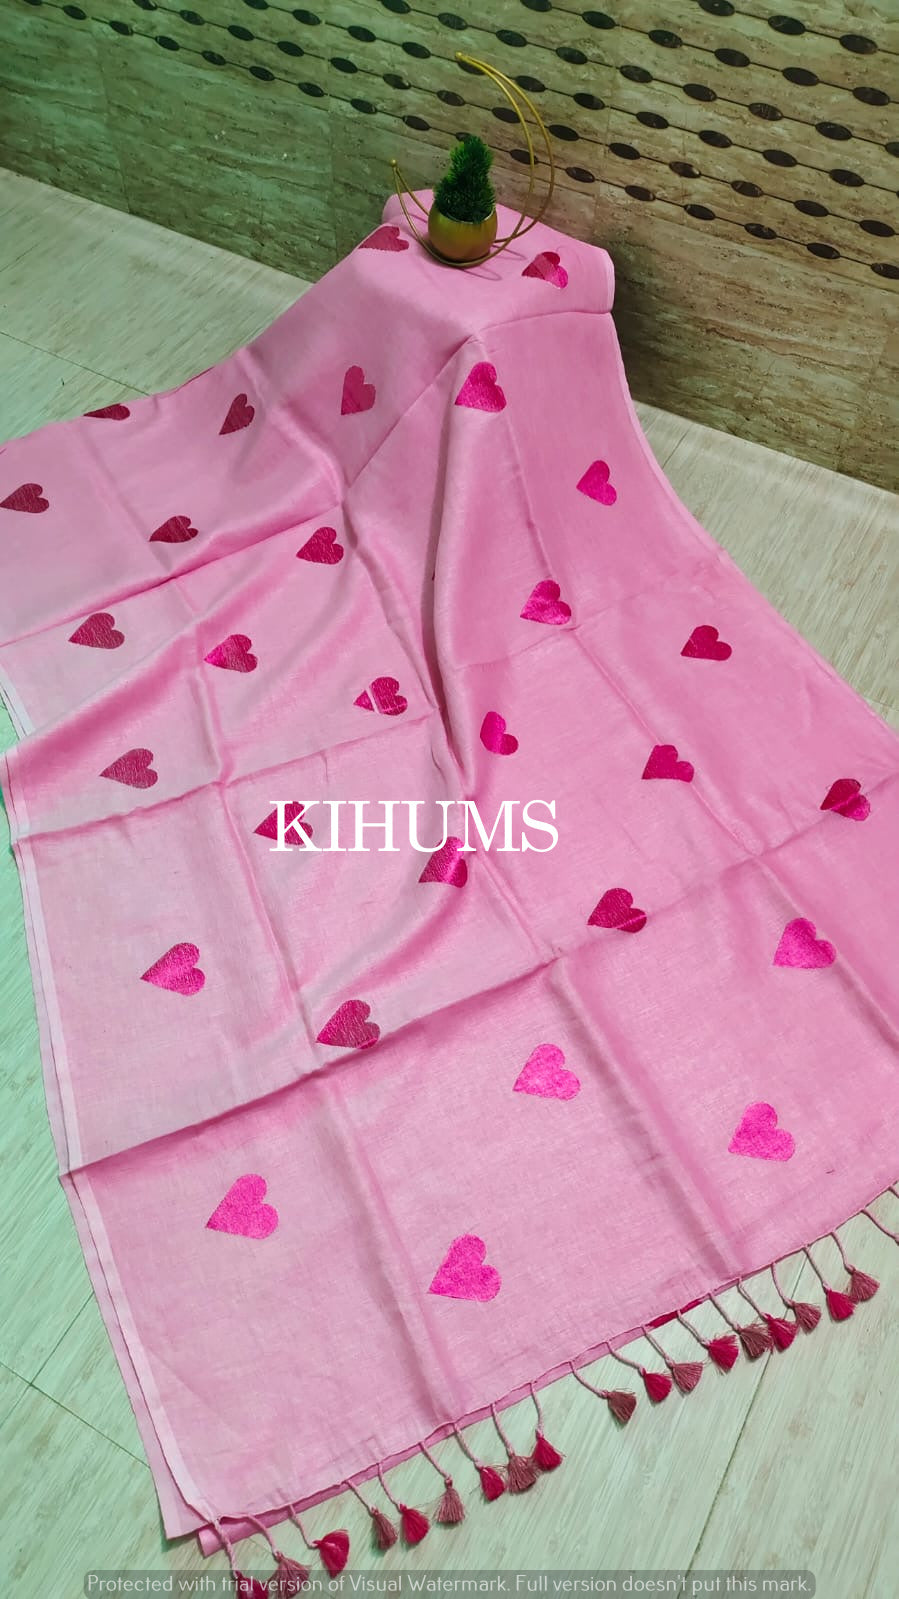 Pink Handwoven Linen Saree with Heart Embroidery Work | KIHUMS Saree